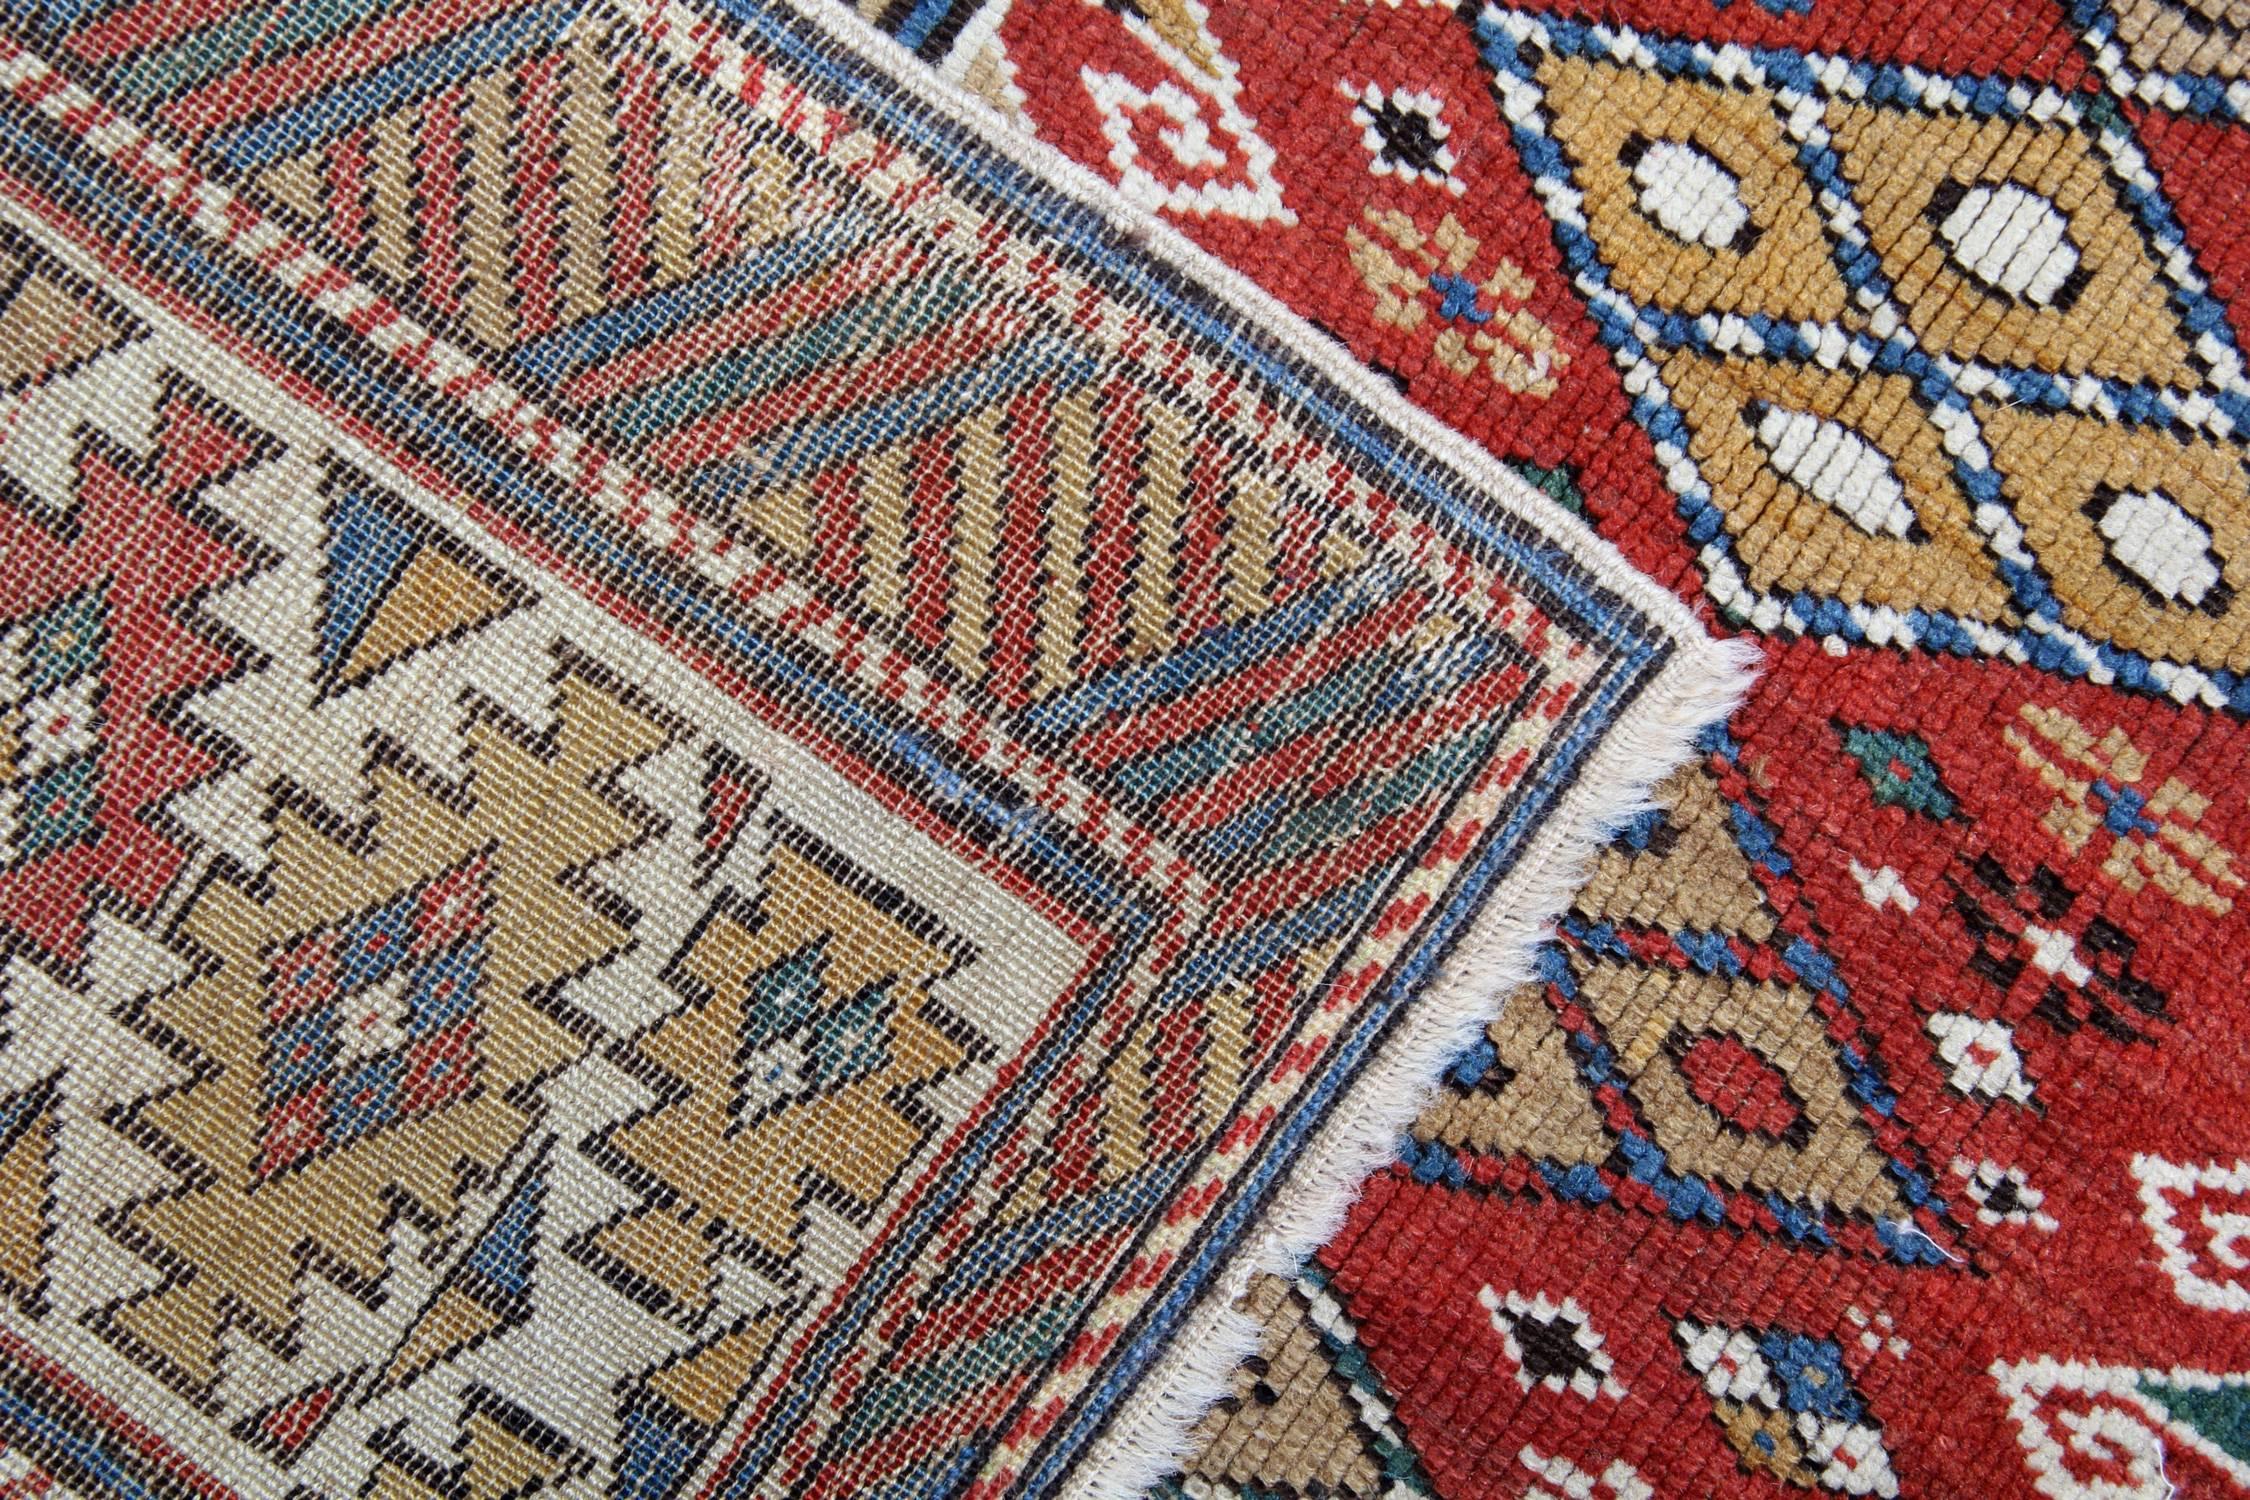 Vegetable Dyed Handmade Antique Caucasian Shirvan Rug, Red Area Antique Rugs For Sale